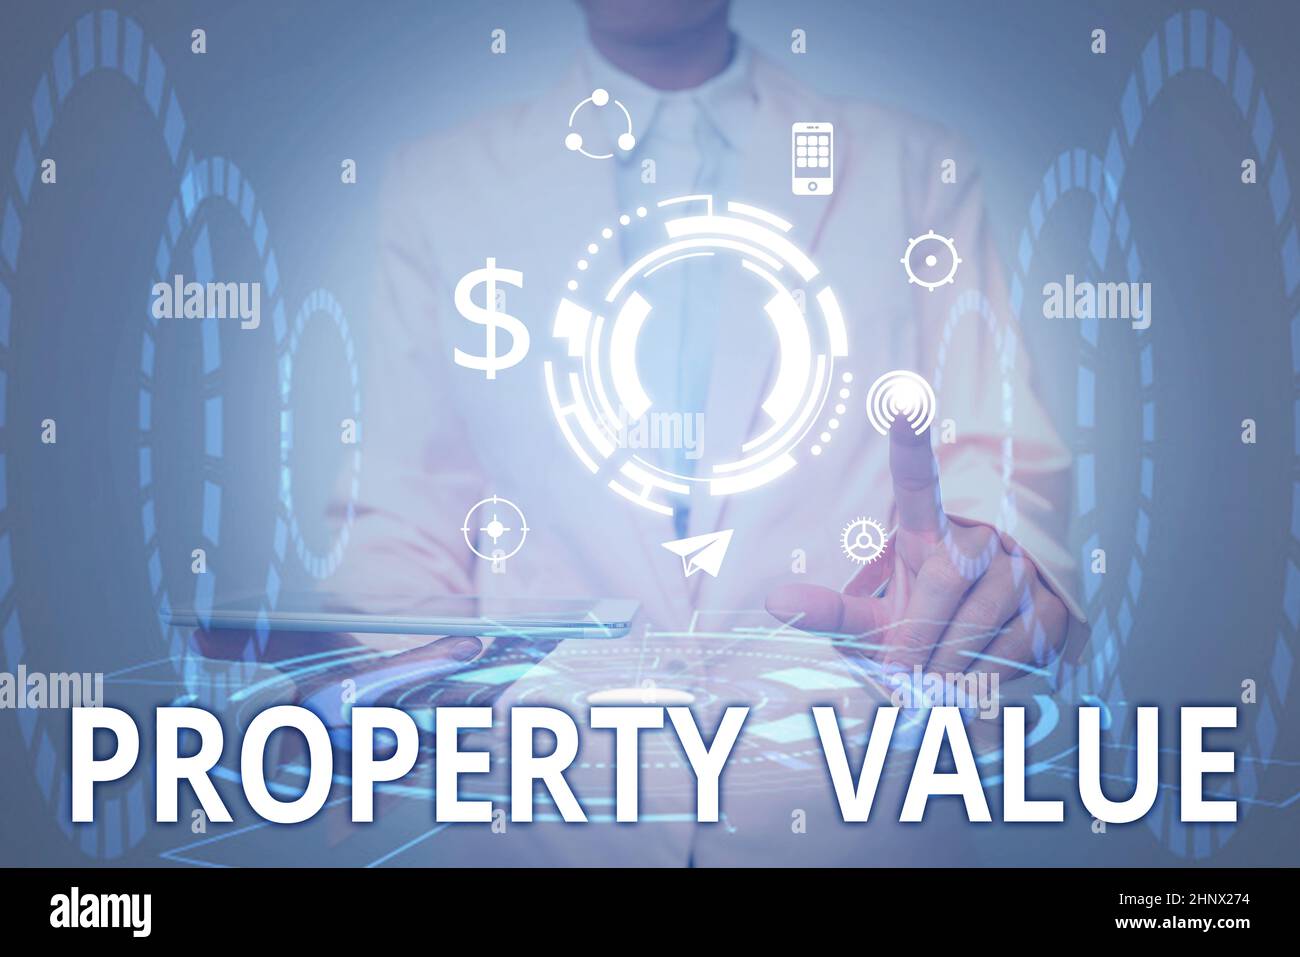 Text sign showing Property Value, Conceptual photo Worth of a land Real estate appraisal Fair market price Lady In Uniform Holding Tablet In Hand Virt Stock Photo